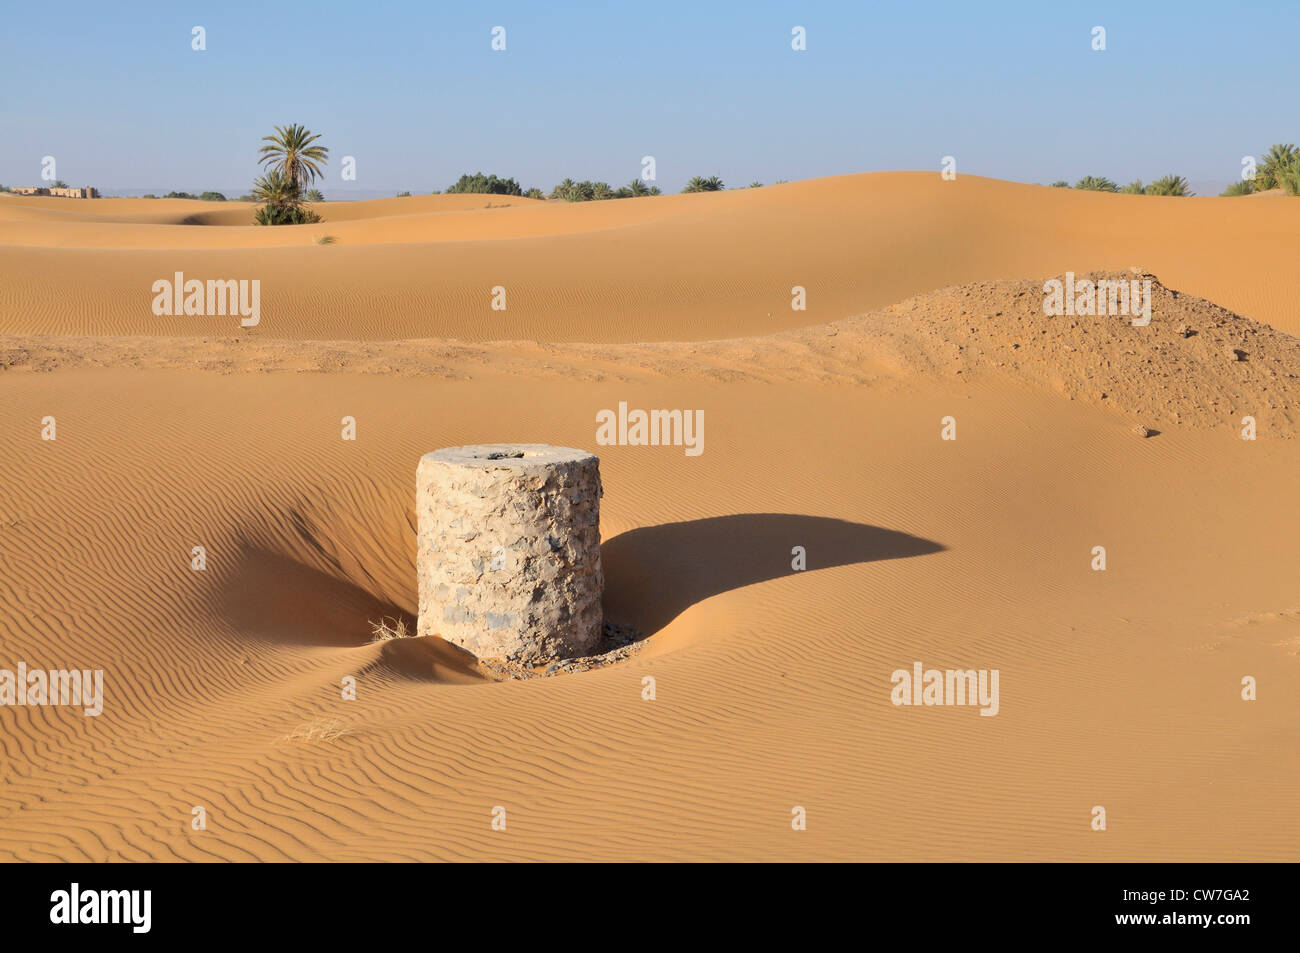 quanat, a water management system in the desert, Morocco, Merzouga Stock Photo